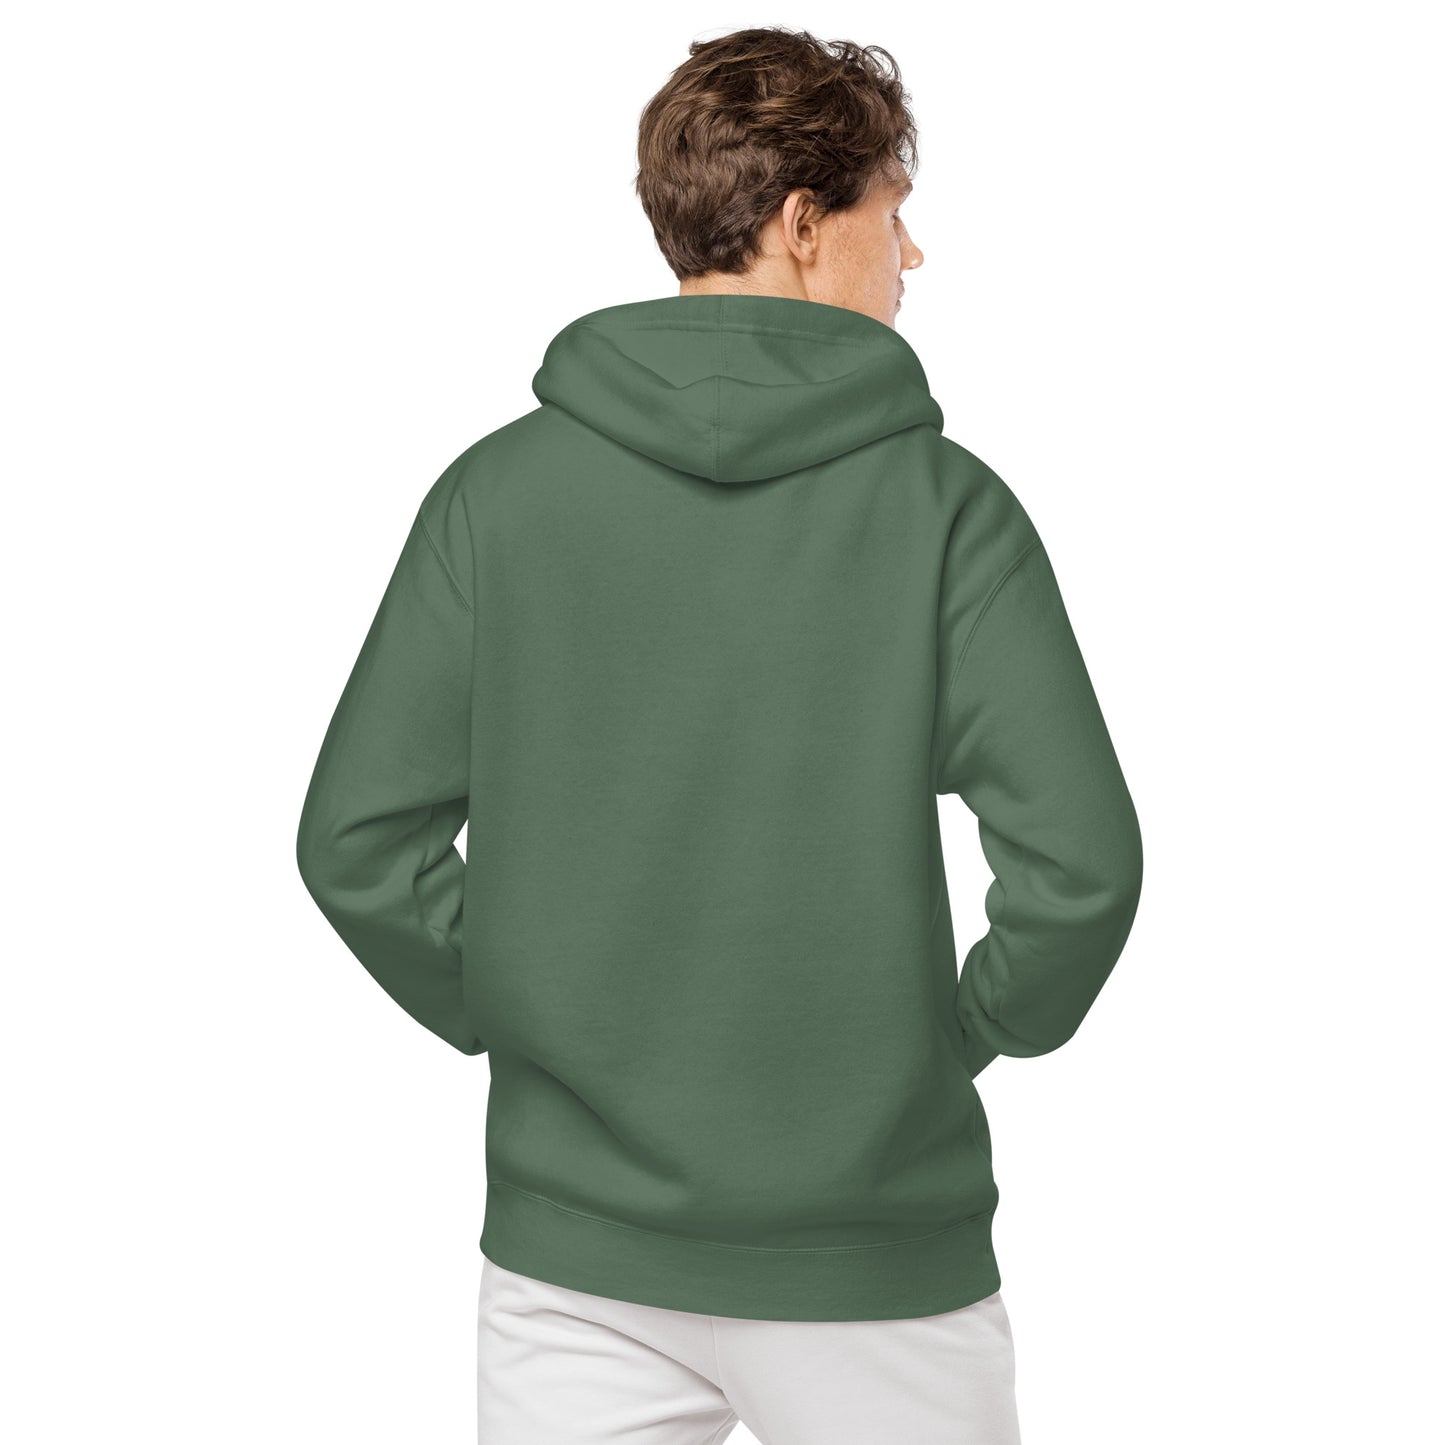 212 Embroidered Ivy League - Unisex pigment-dyed hoodie